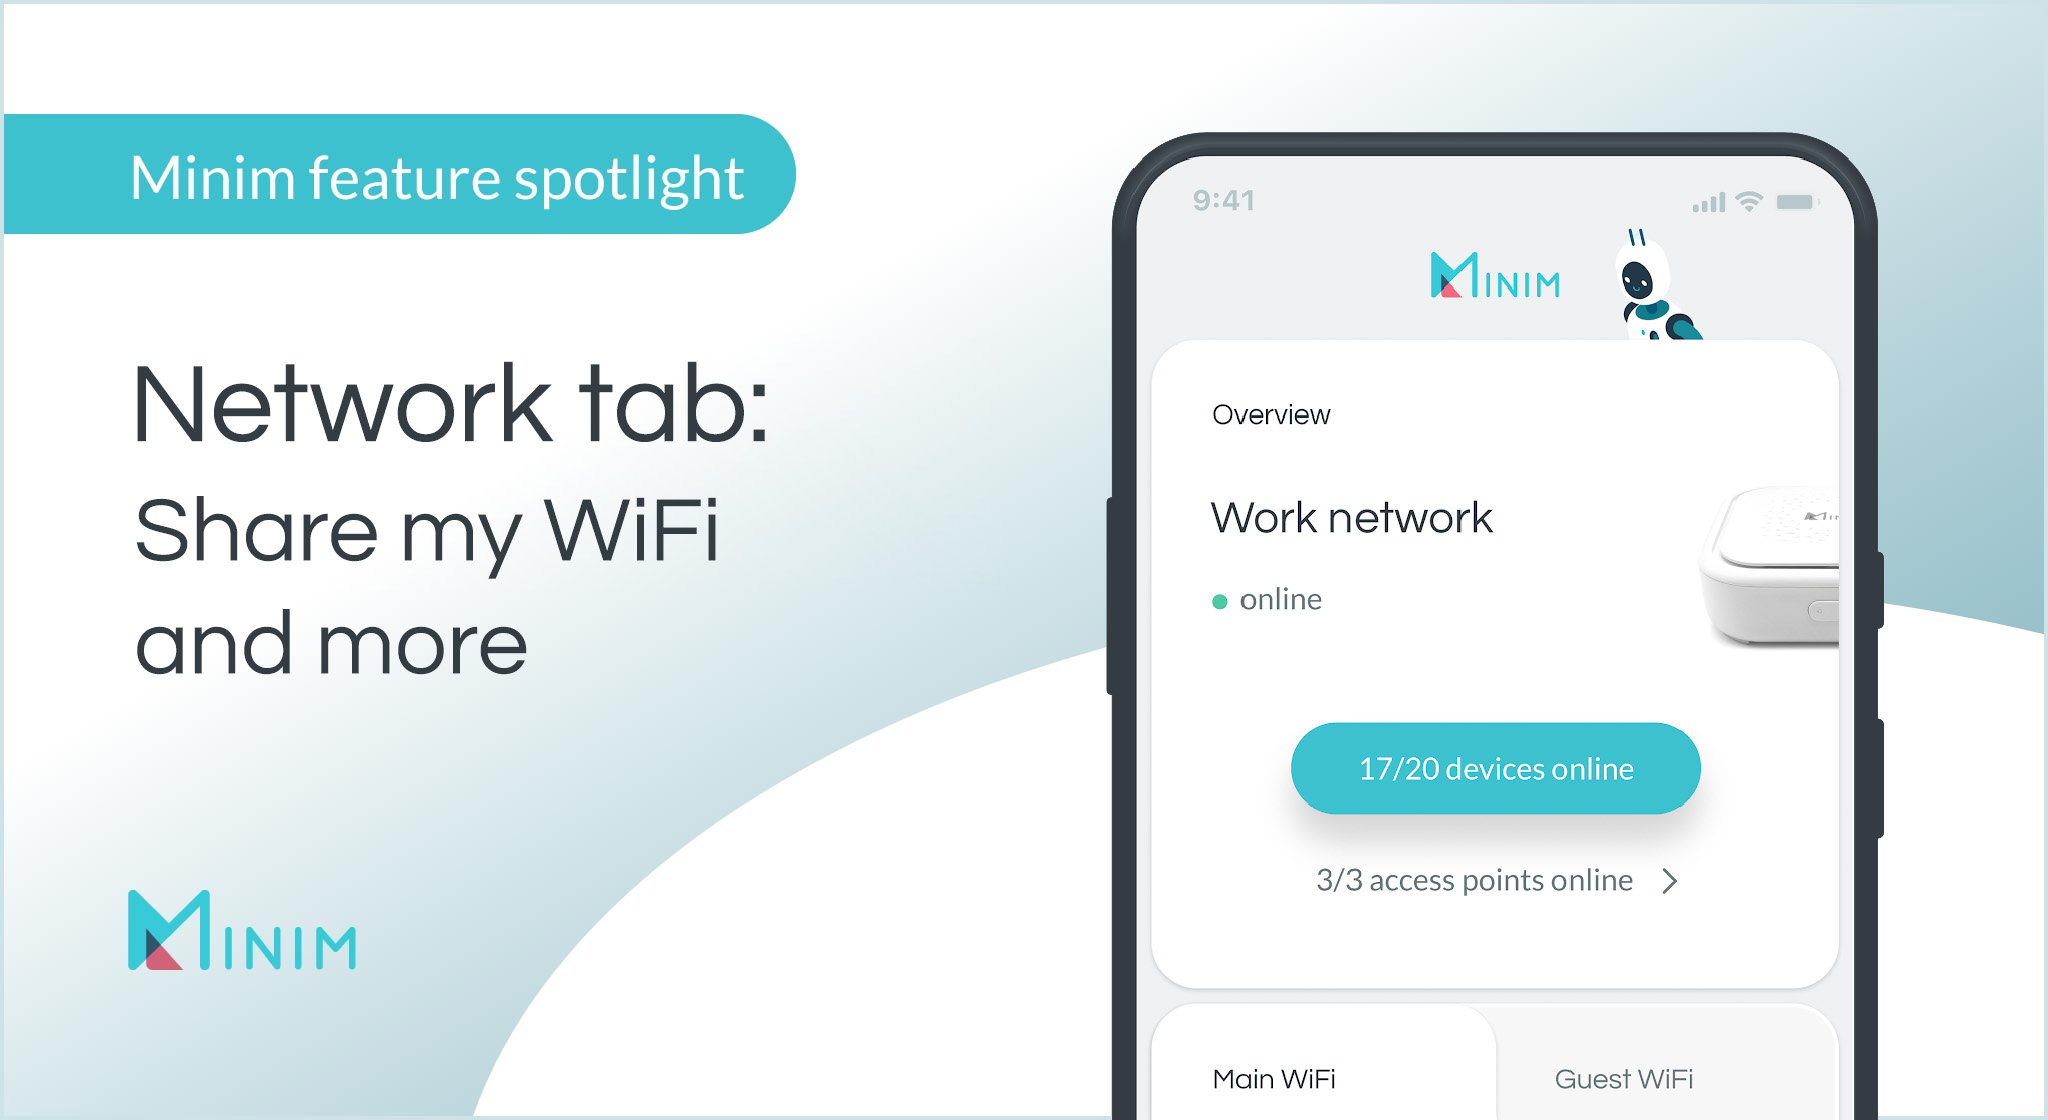 Minim mobile app features spotlight: share my WiFi and more